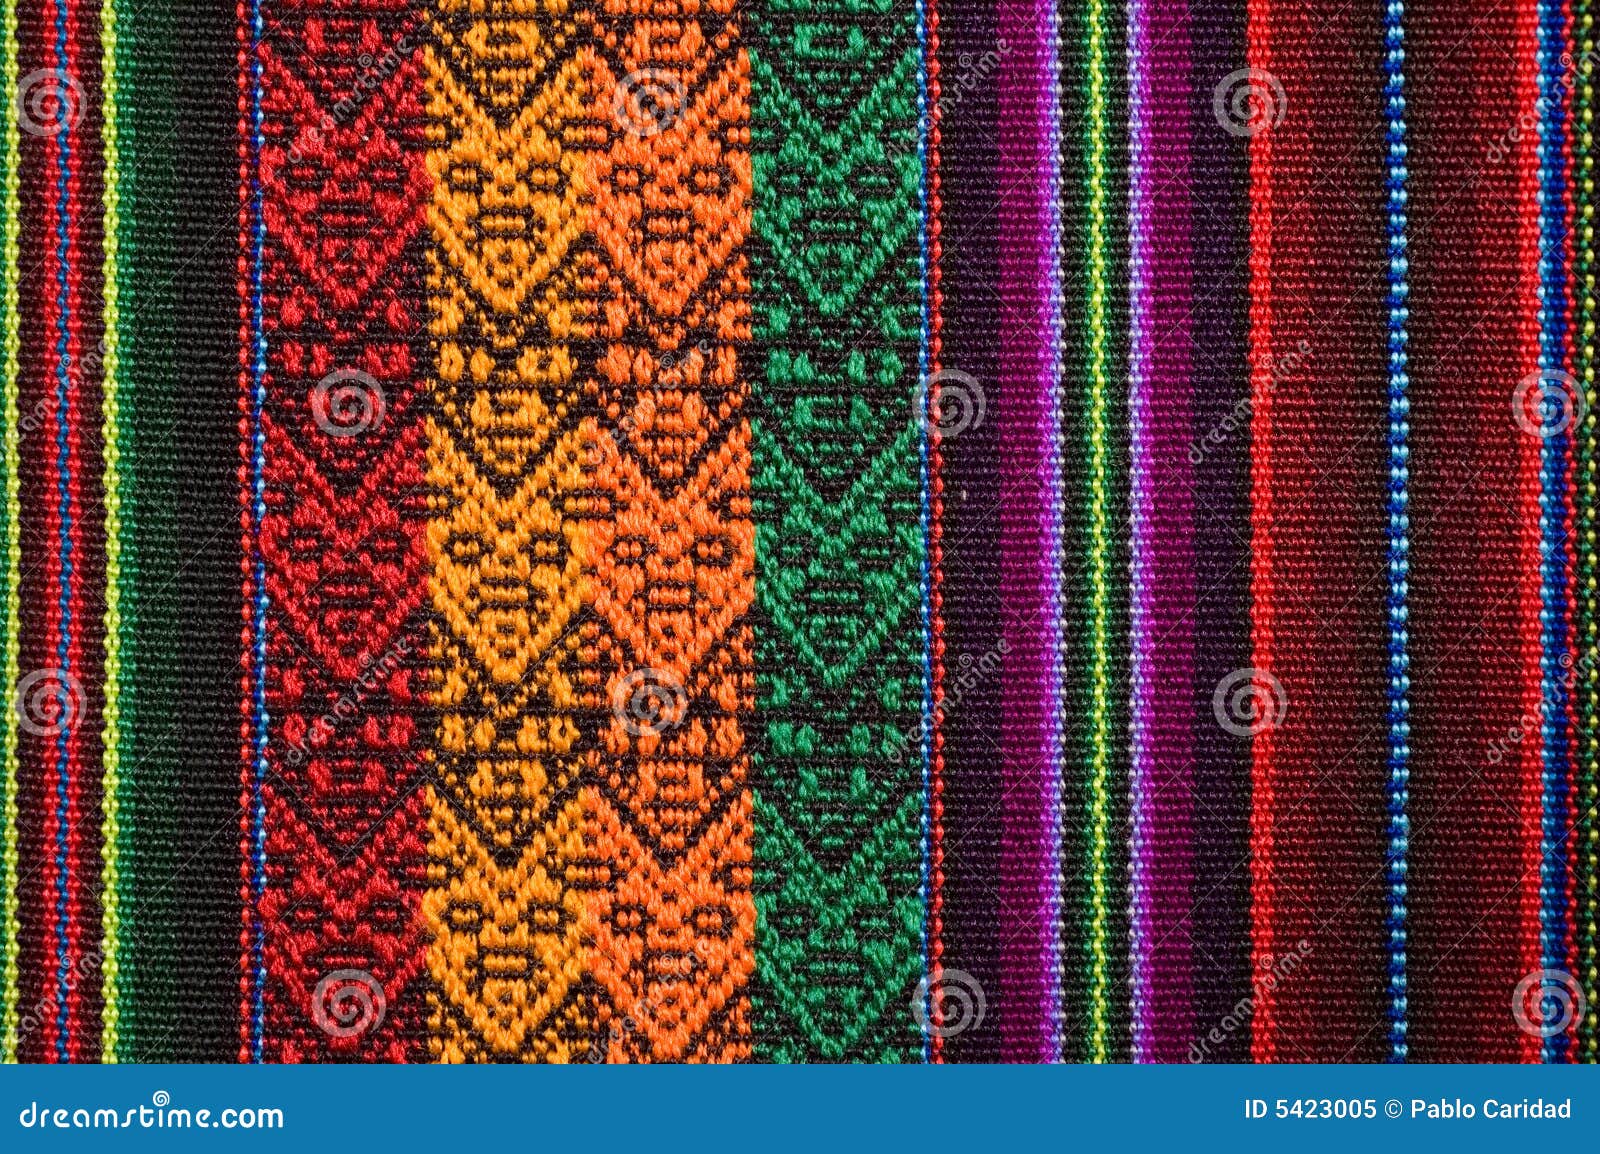 traditional andean tapestry.